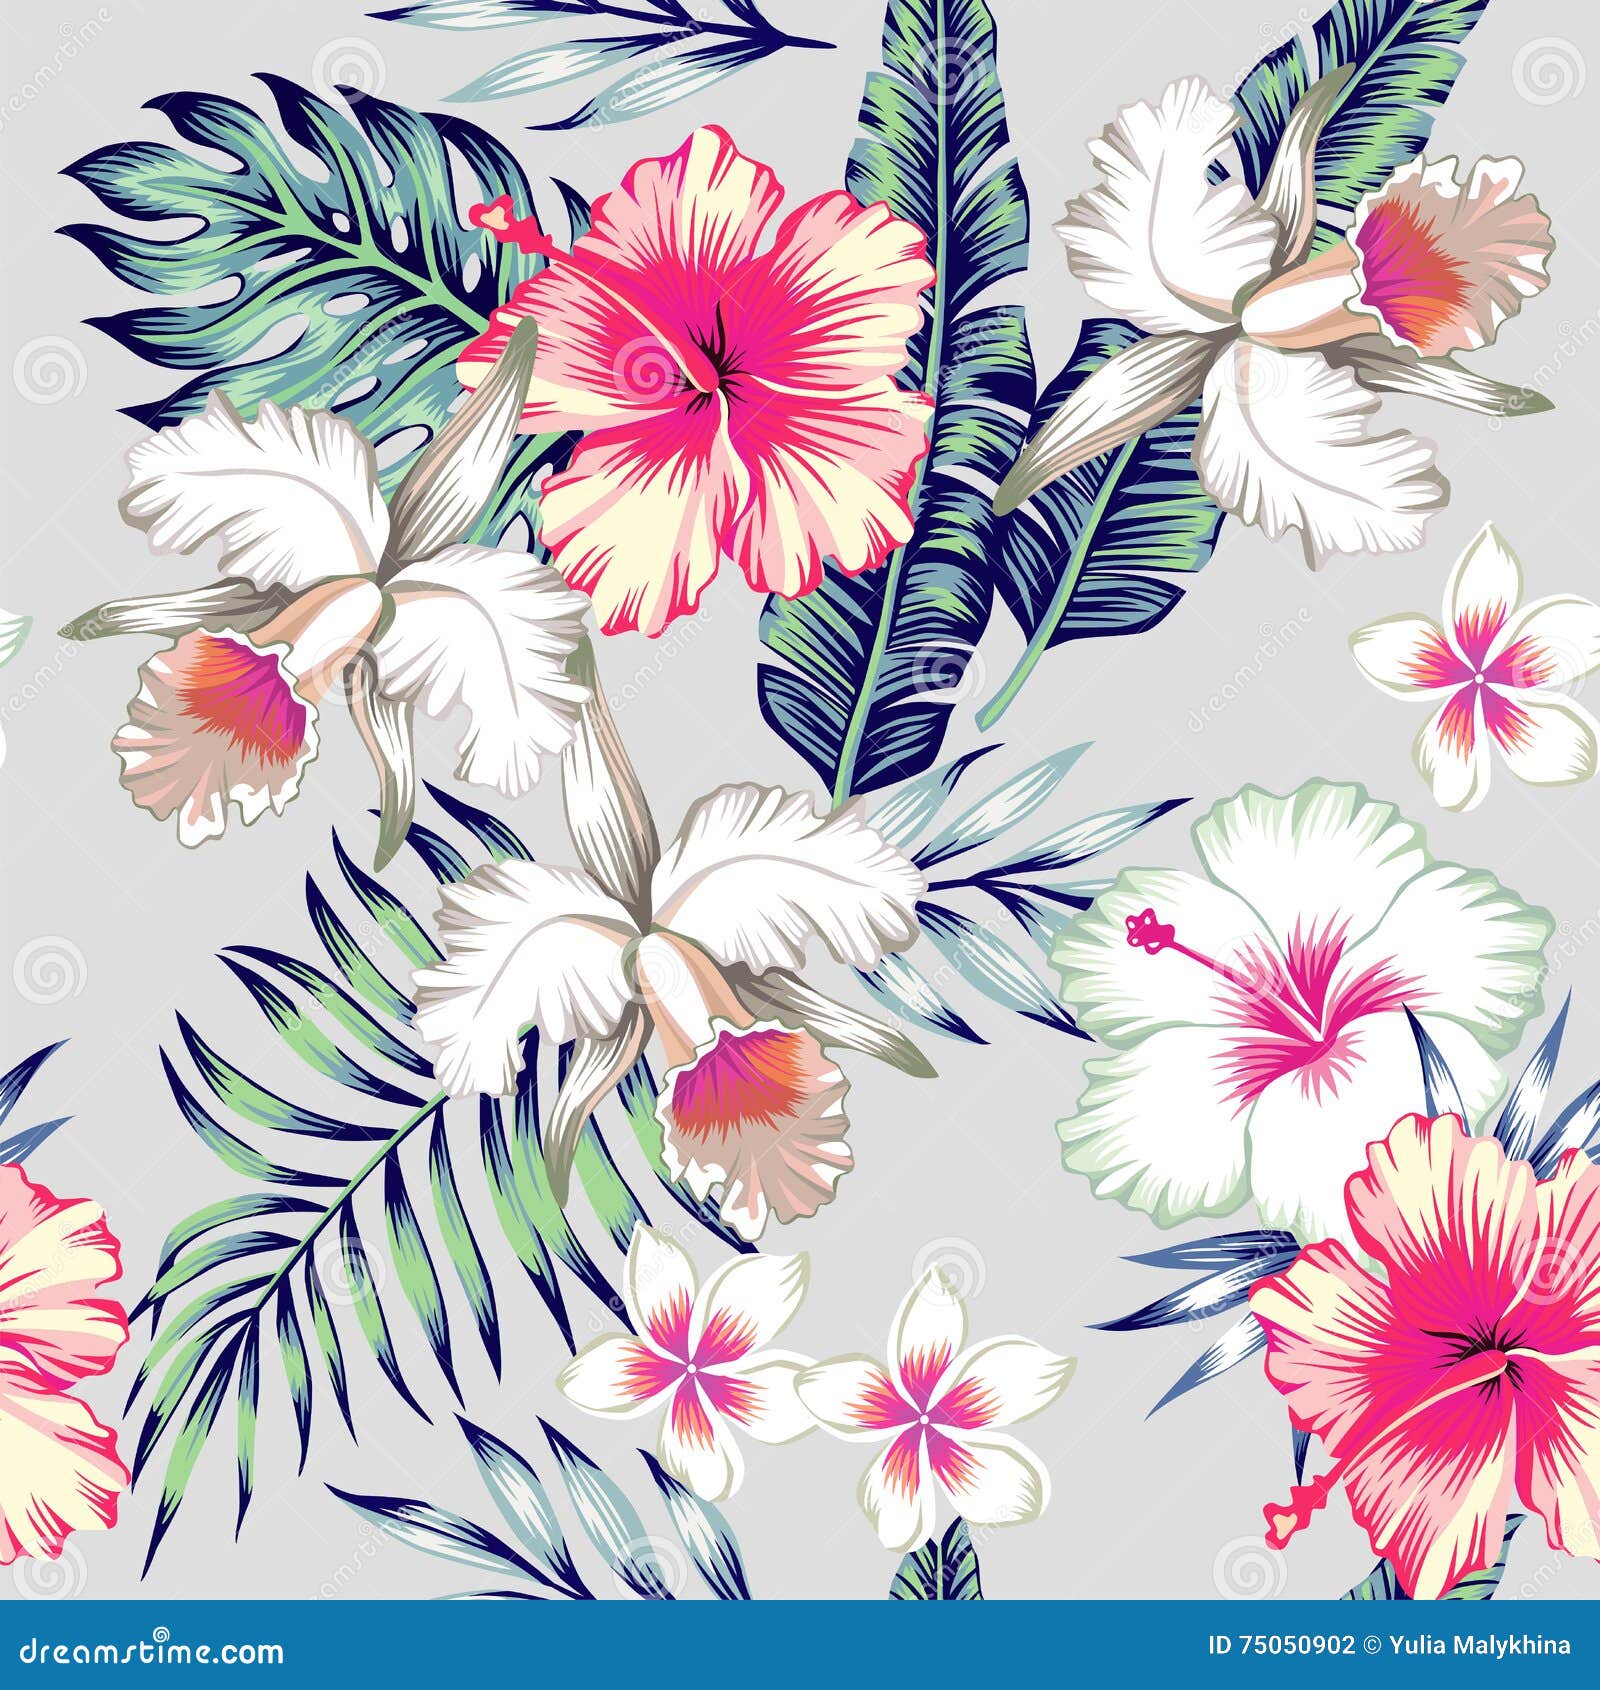 hibiscus and orchids tropical seamless background